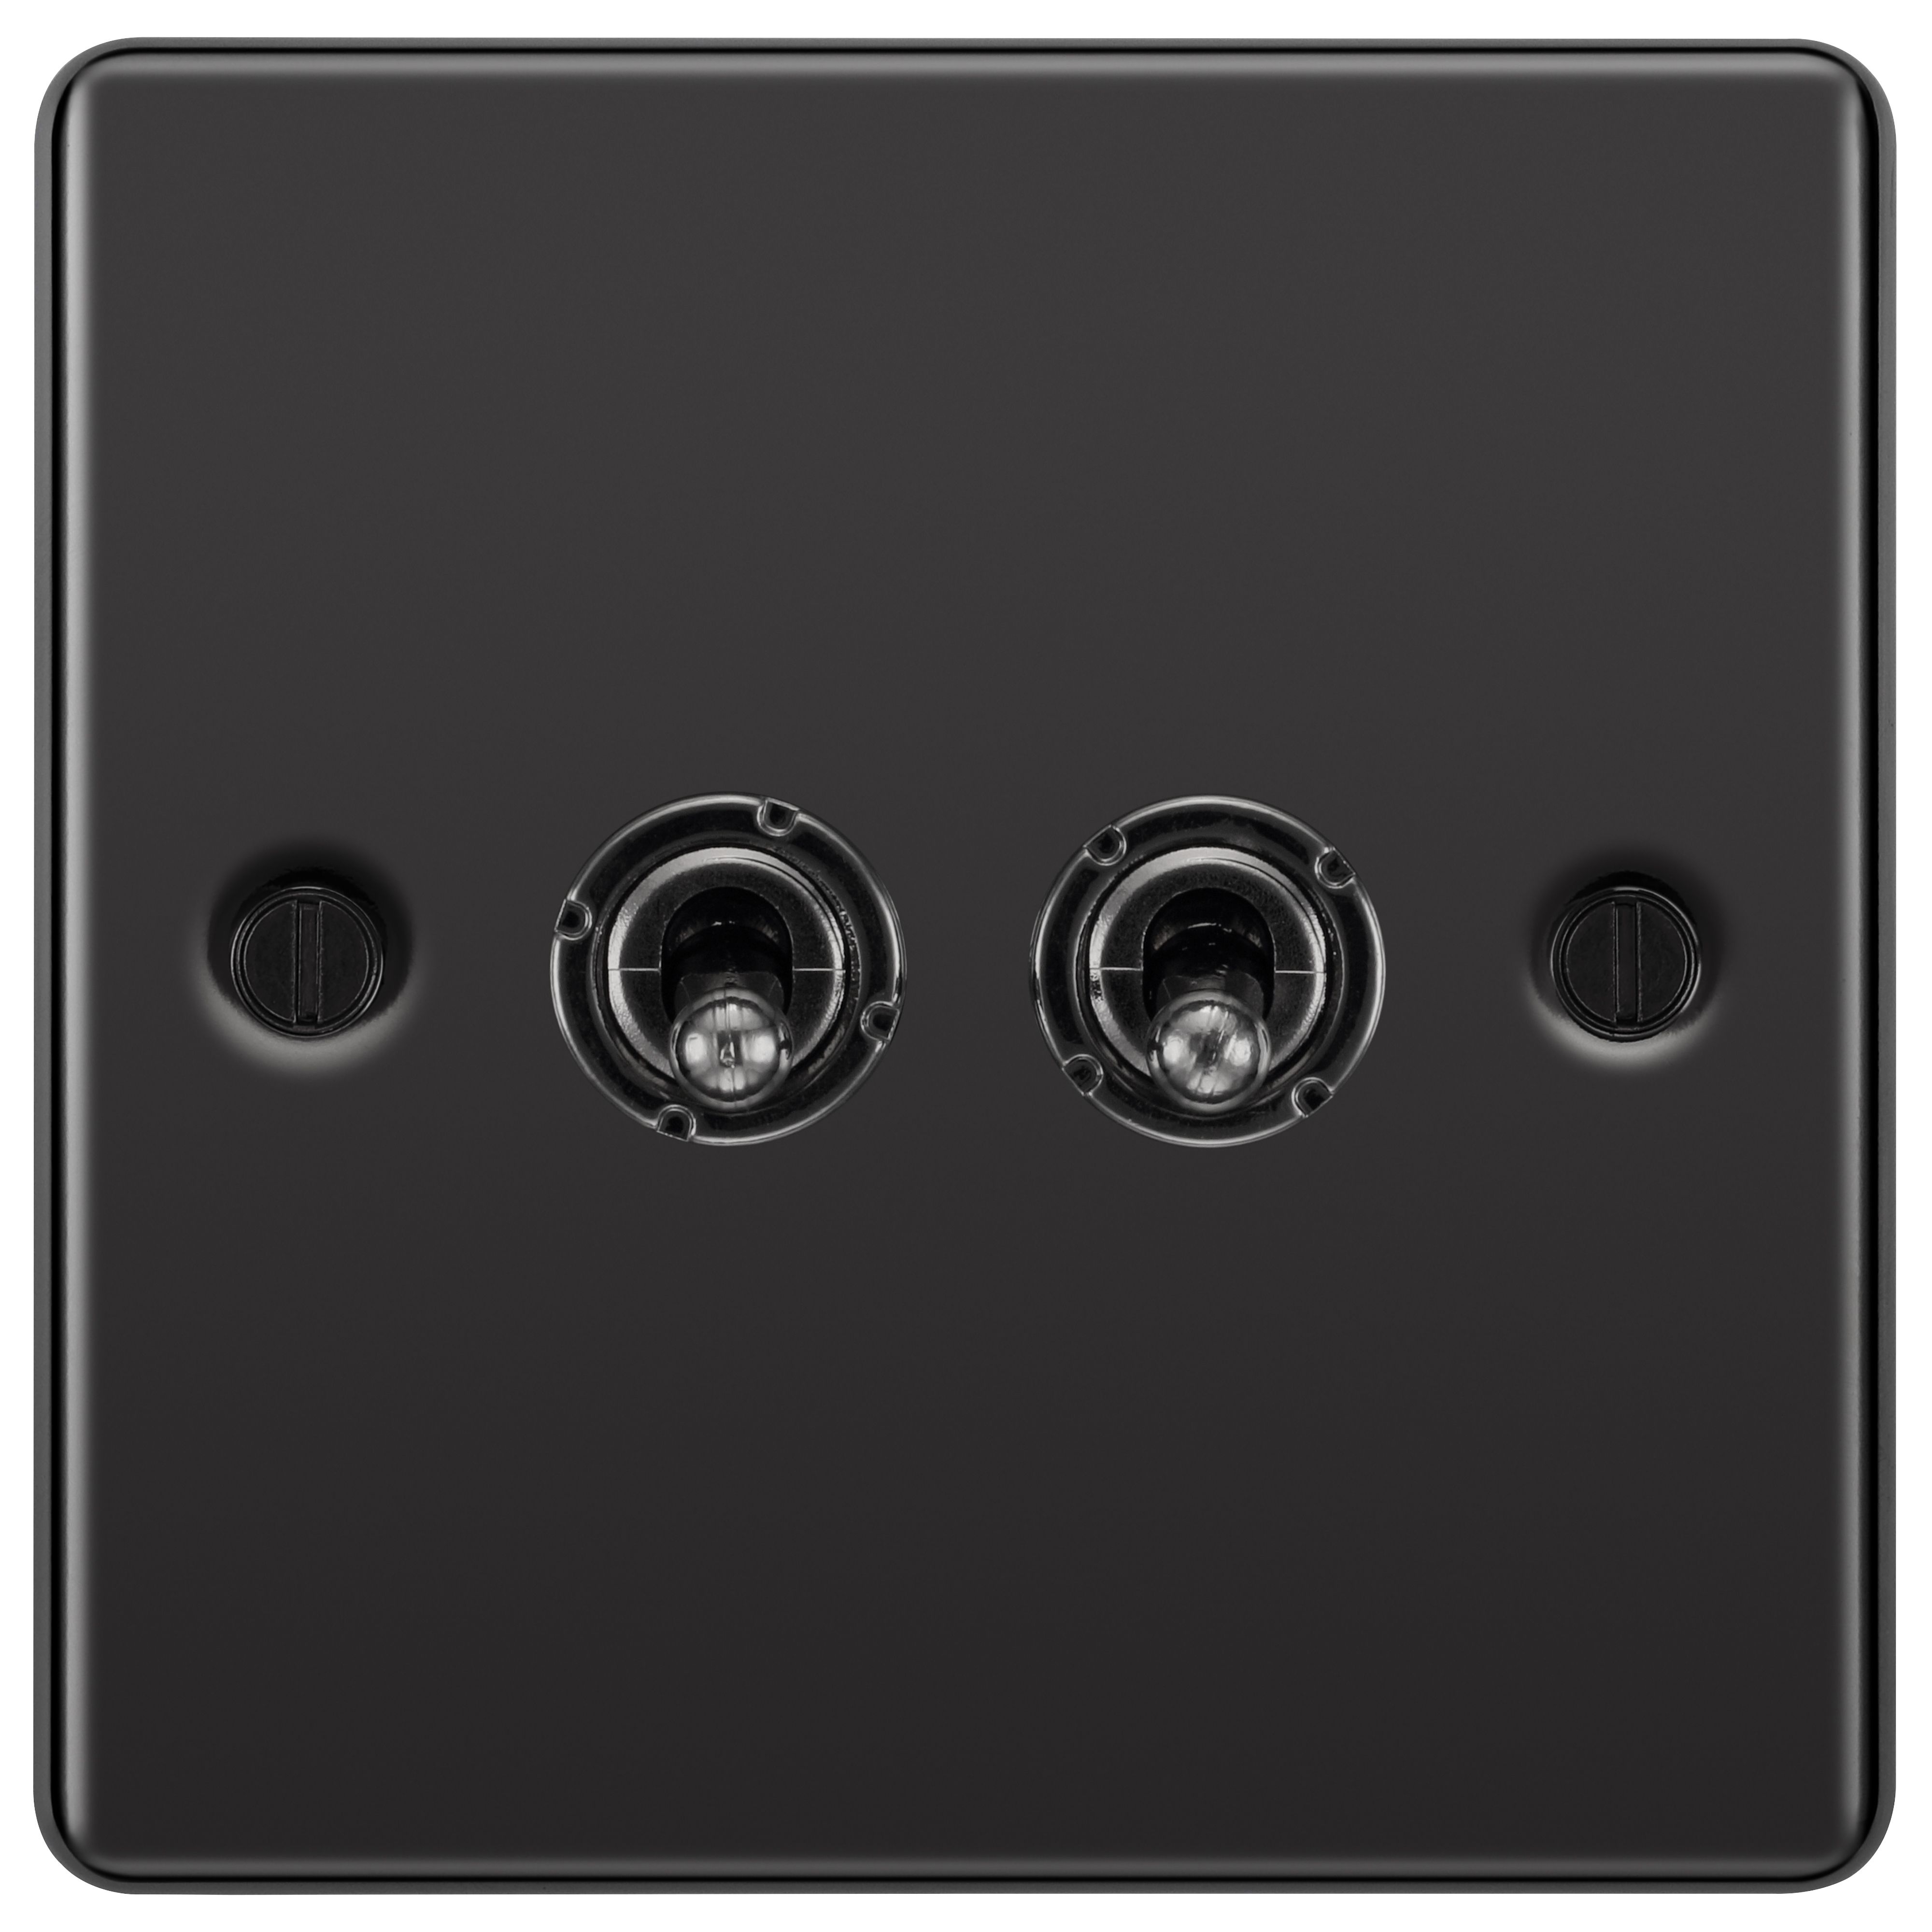 GoodHome 20A 2 way 2 gang Toggle switch Gloss Black Nickel effect